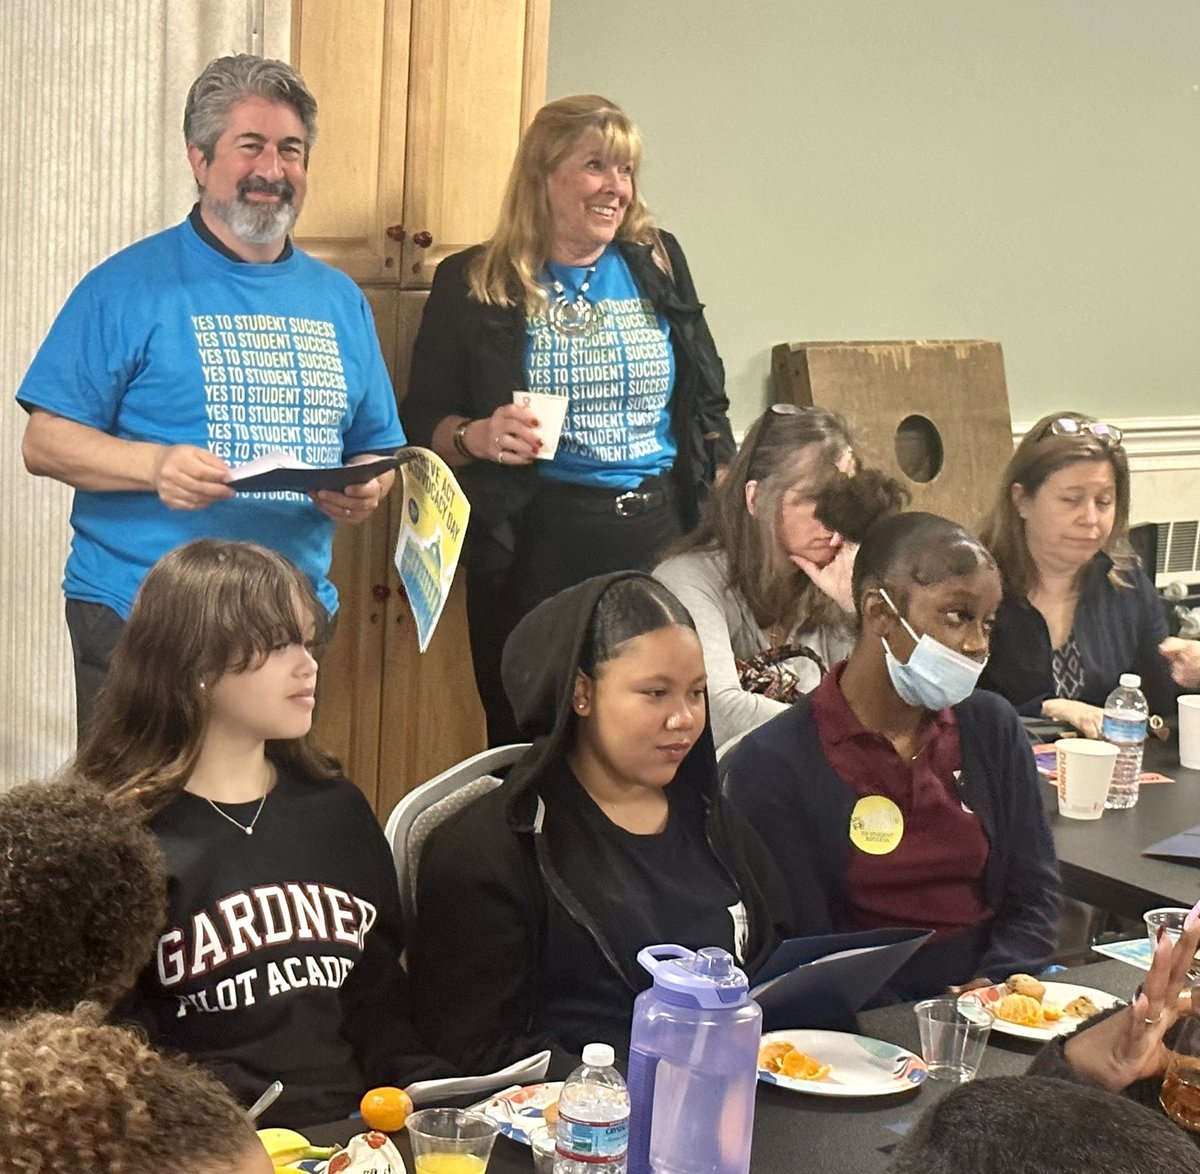 What do we want? #ThriveAct! When do we want it? NOW! Training underway in advance of today’s Statehouse House Advocacy Day. #mapoli #maedu – with @aftmass @progressivemass @mass_cps @btu66 @massedjustice